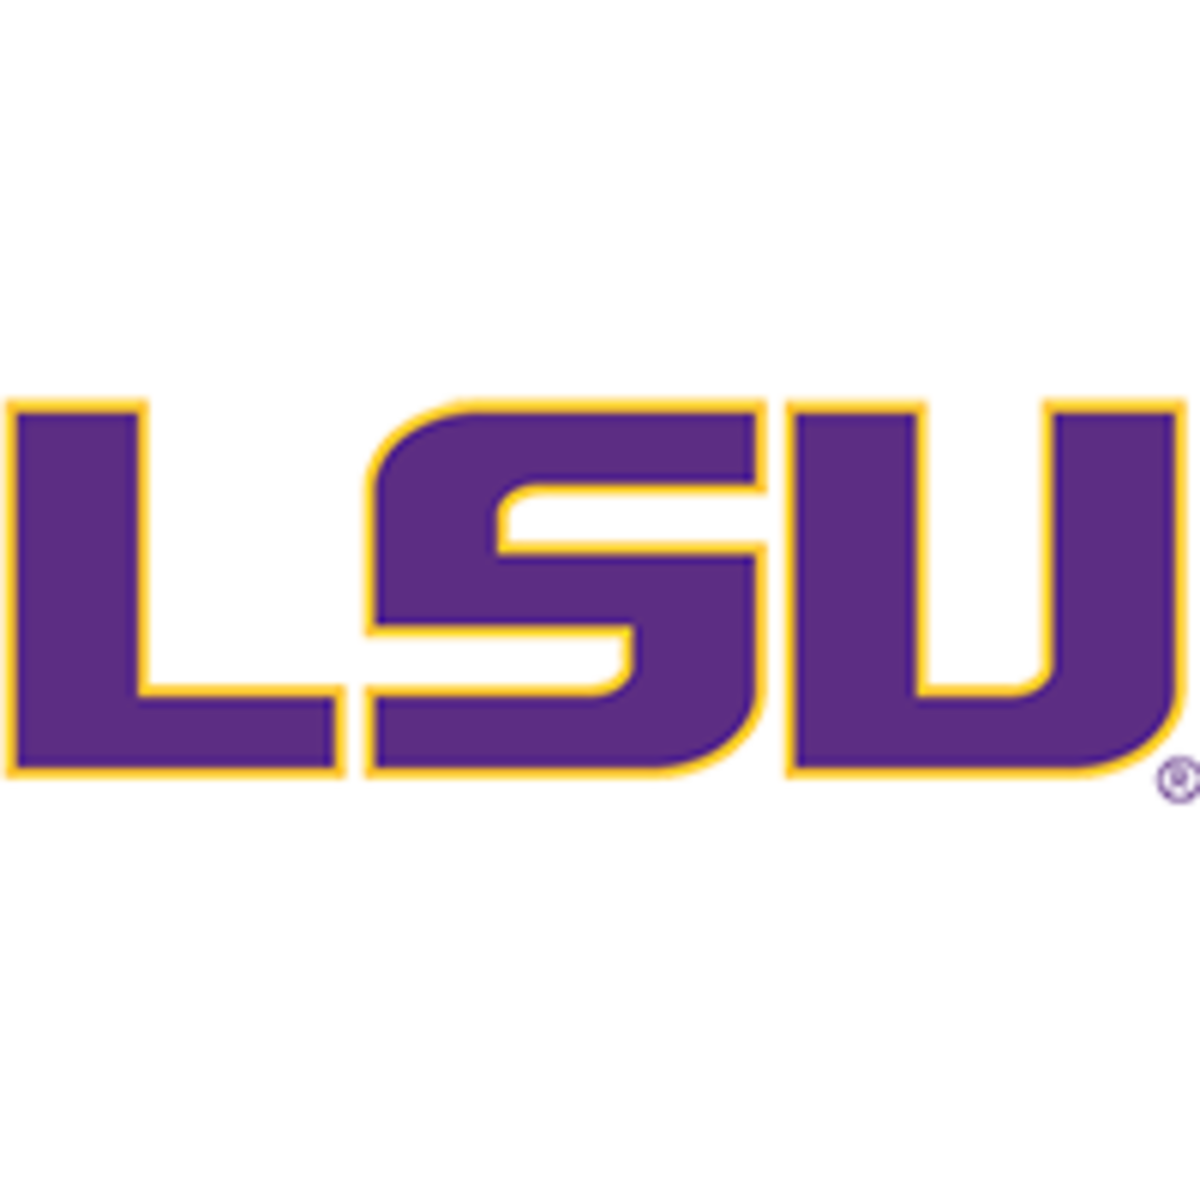 Lsu Schedule 2022 Football Lsu Football Schedule 2022 - Athlonsports.com | Expert Predictions, Picks,  And Previews